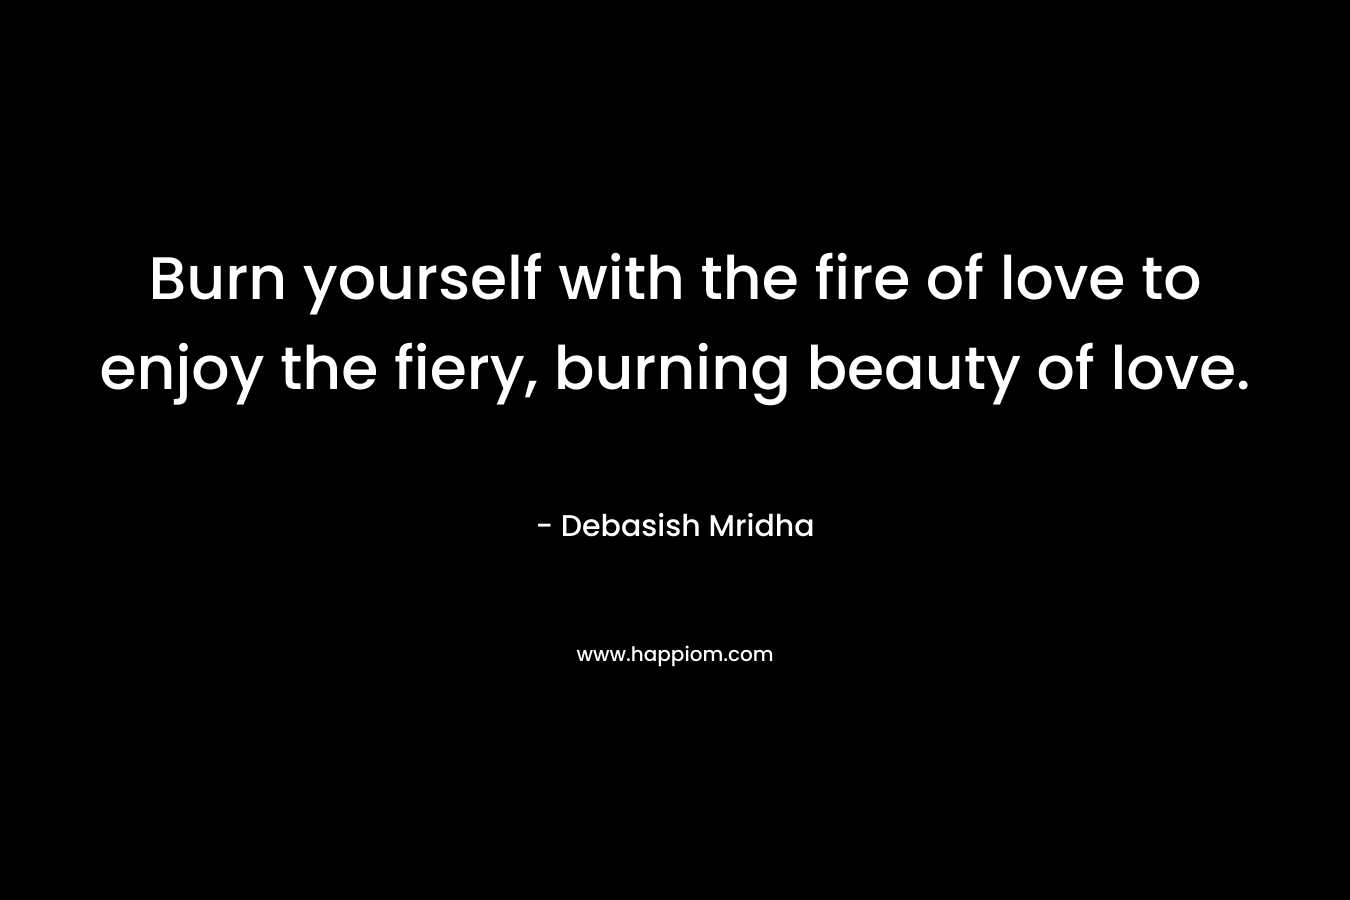 Burn yourself with the fire of love to enjoy the fiery, burning beauty of love.